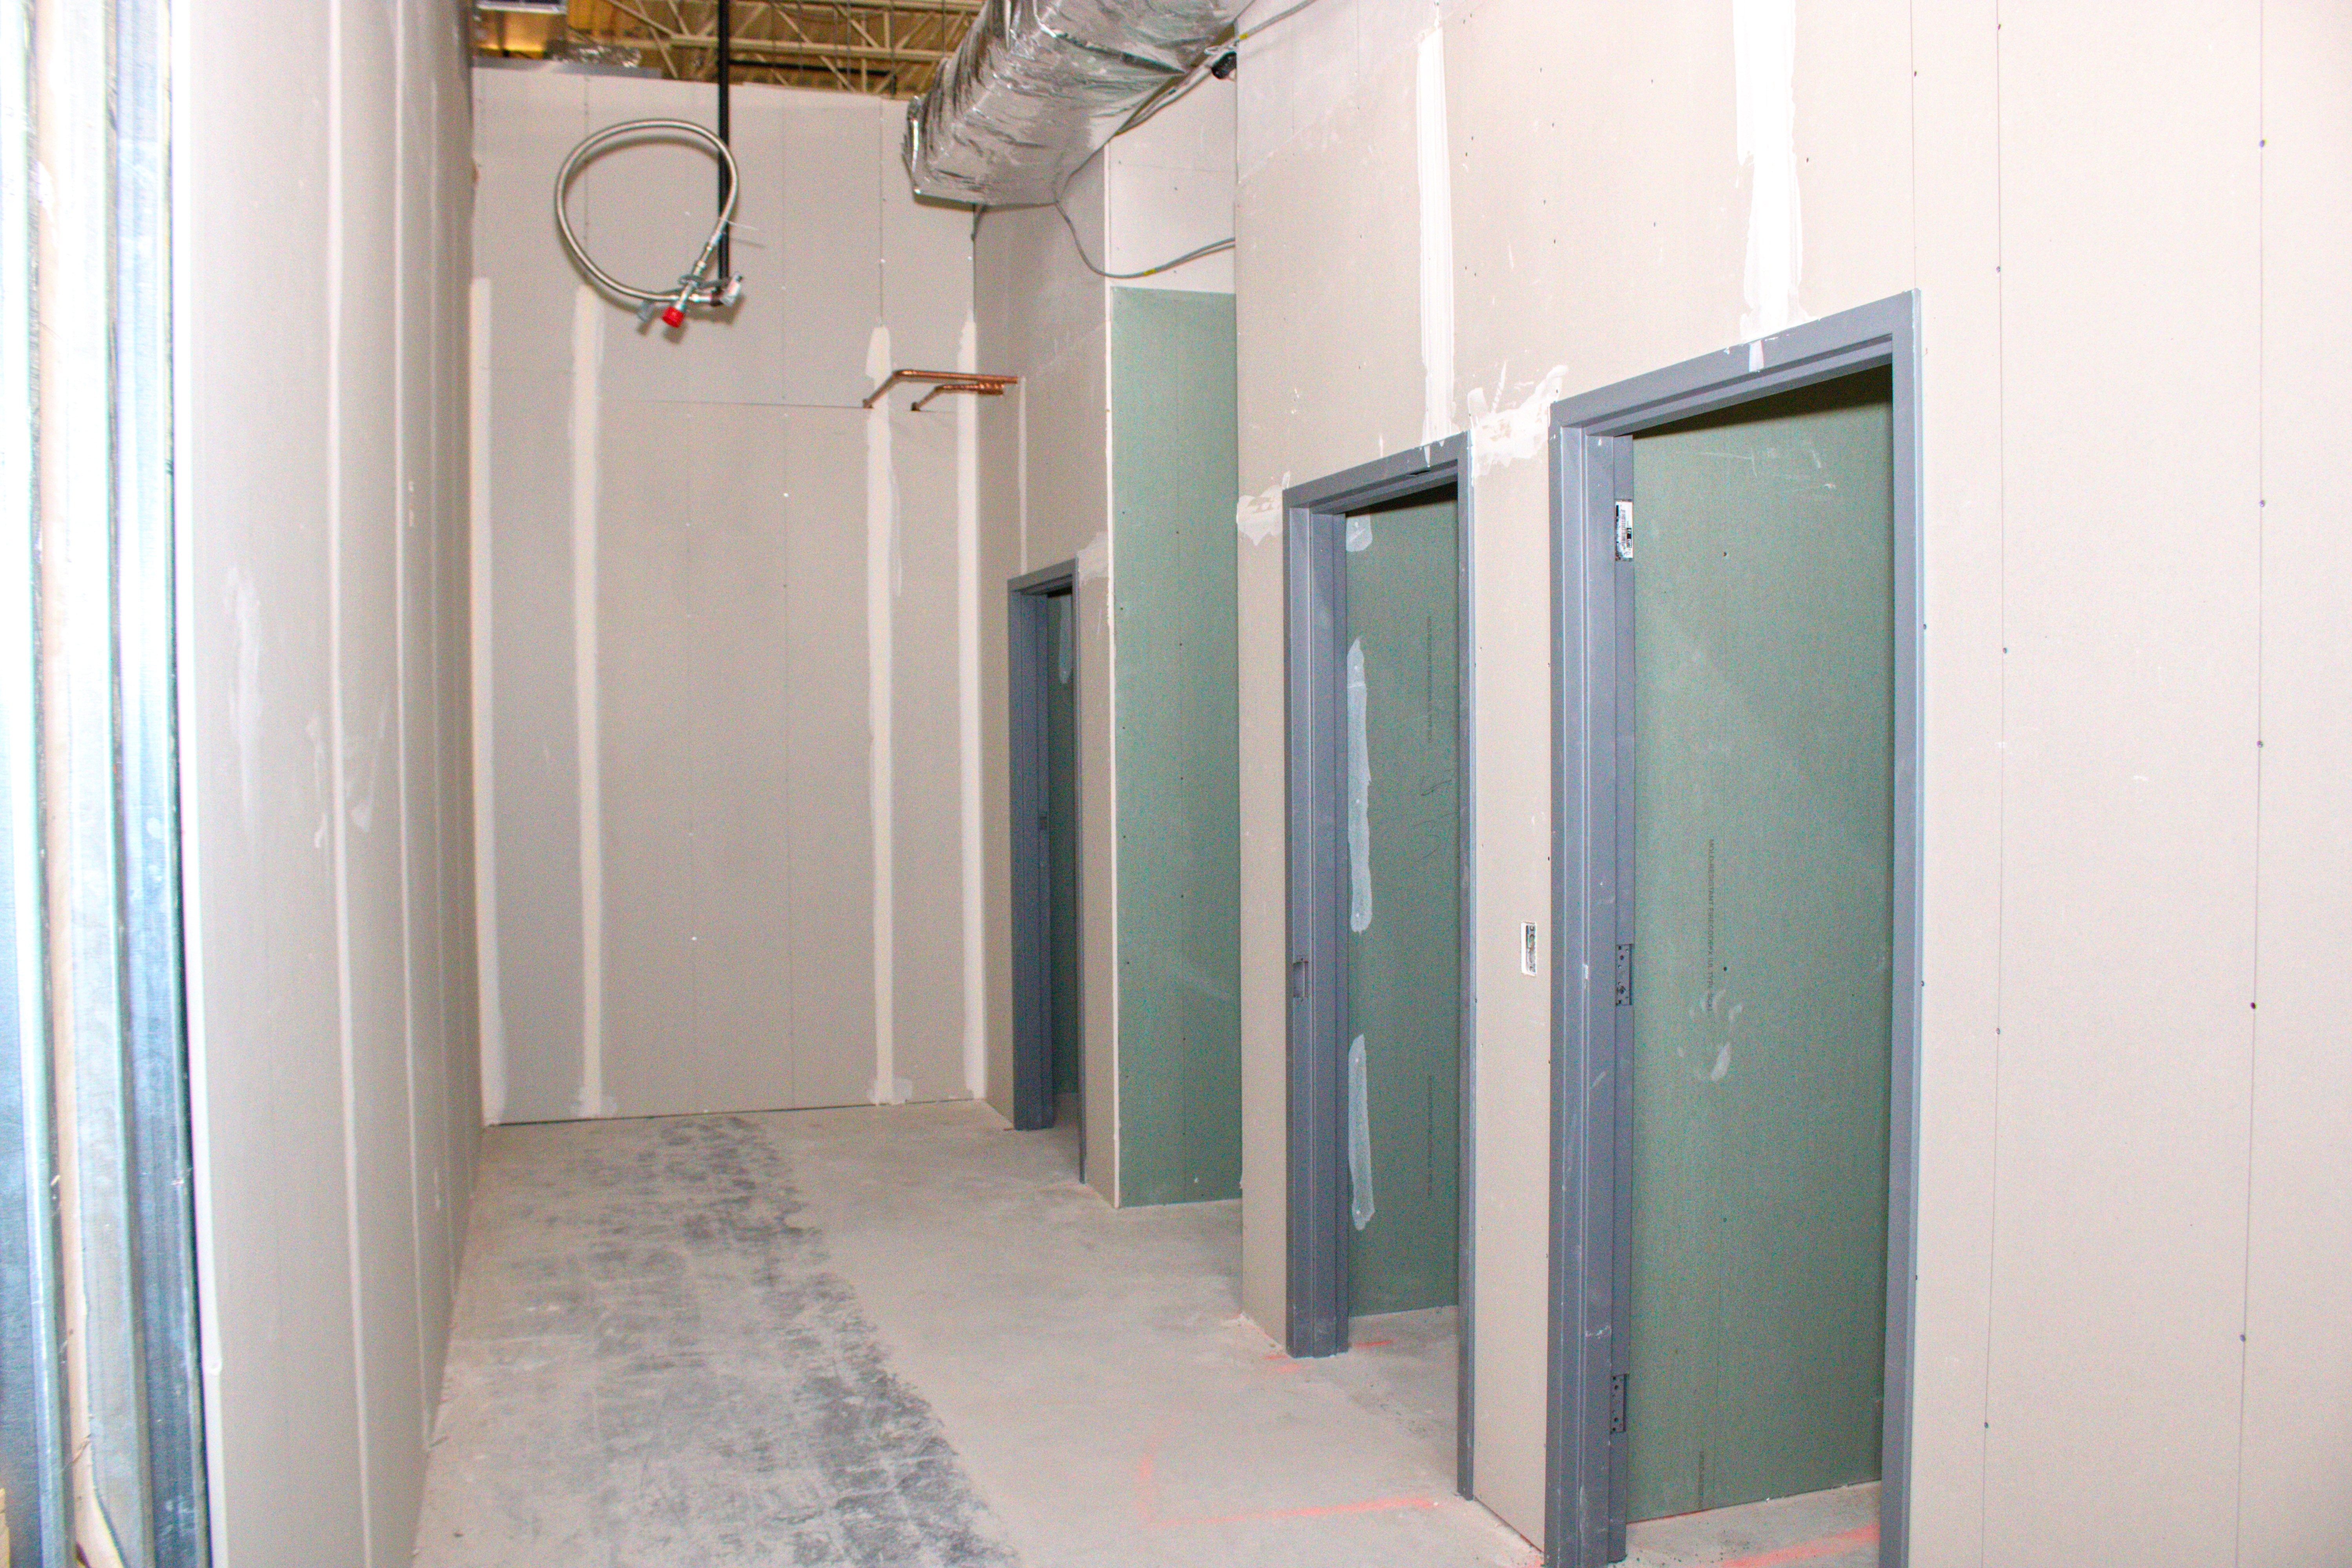 Corridor-with-Rec-Bathrooms-and-Janitor-Storage-in-Middle